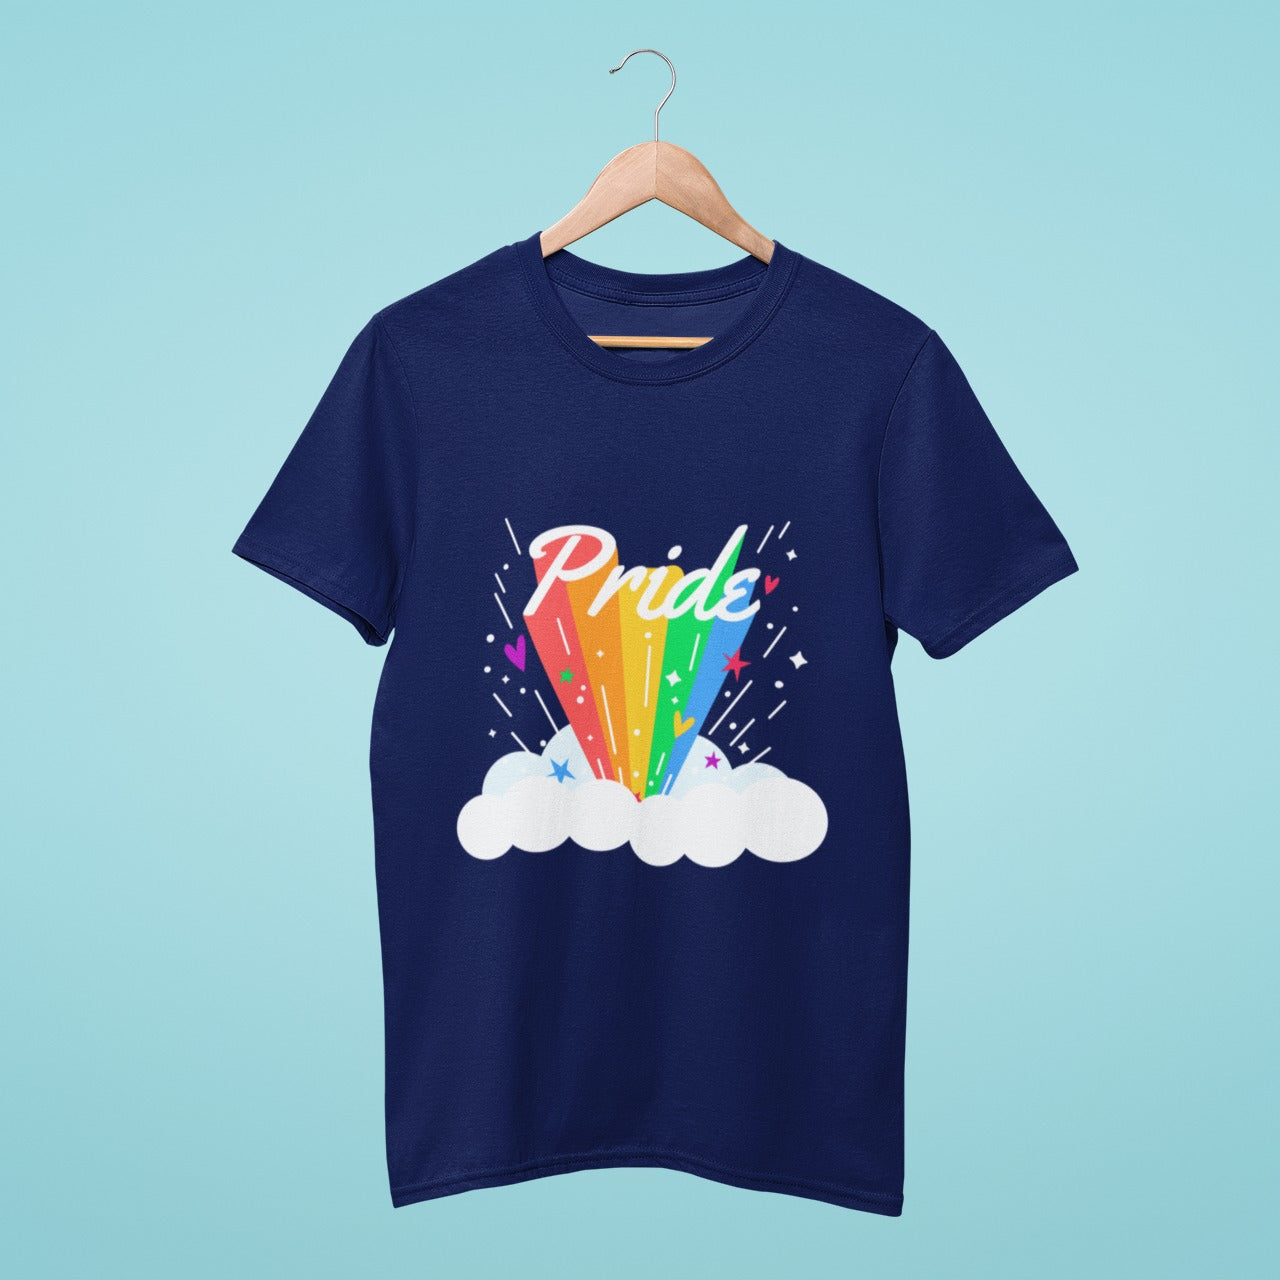 Get ready to make a statement with our navy blue t-shirt featuring a unique Pride design! The word "Pride" emerges from a cloud with a rainbow trail, making it clear that you stand with the LGBTQ+ community. With a comfortable fit and eye-catching design, this t-shirt is perfect for any occasion. Show your support for equality and wear your Pride on your sleeve with this navy blue tee.